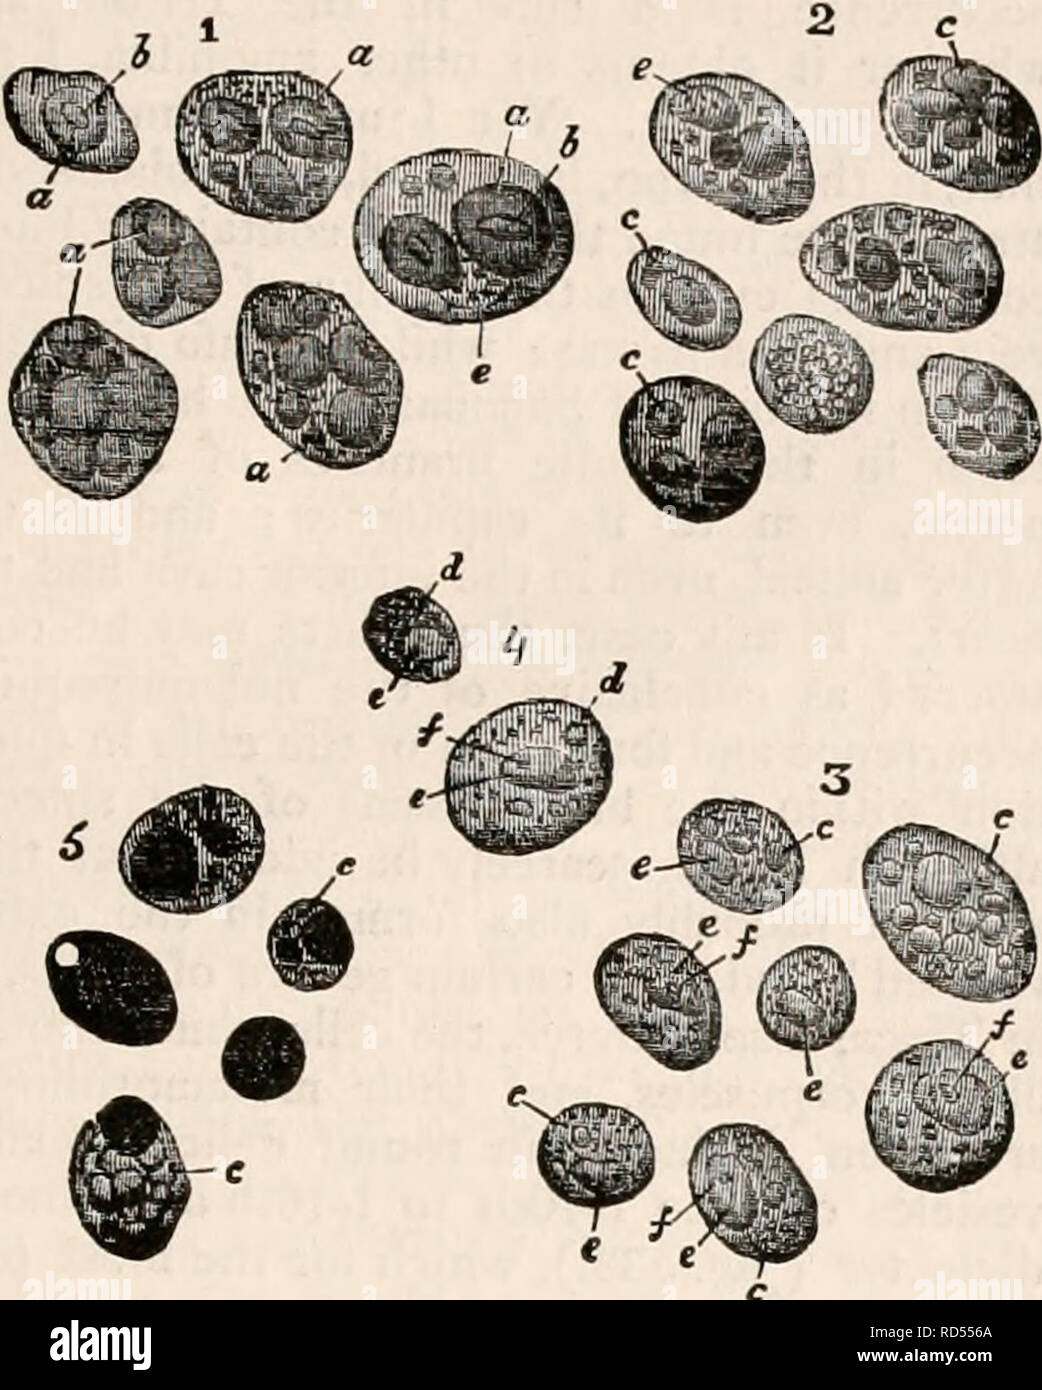 . The cyclopædia of anatomy and physiology. Anatomy; Physiology; Zoology. SPLEEN. surrounds itself with a part of the blood (plasma and globules), and, finally, con- Fig. 532. 783. Cells containing blood corpuscles, from the spleen of the frog (Rana temporaria and esculenta), magnified 350 diameters. 1, cells with one or more blood globules of an intense yellow colour, diminished in size, yet mostly not yet destroyed ; 2, cells with blood globules coloured brown, orange, or black, still more diminished and dissolved (coloured granule cells); 3, cells with blood globules much diminished or quit Stock Photo